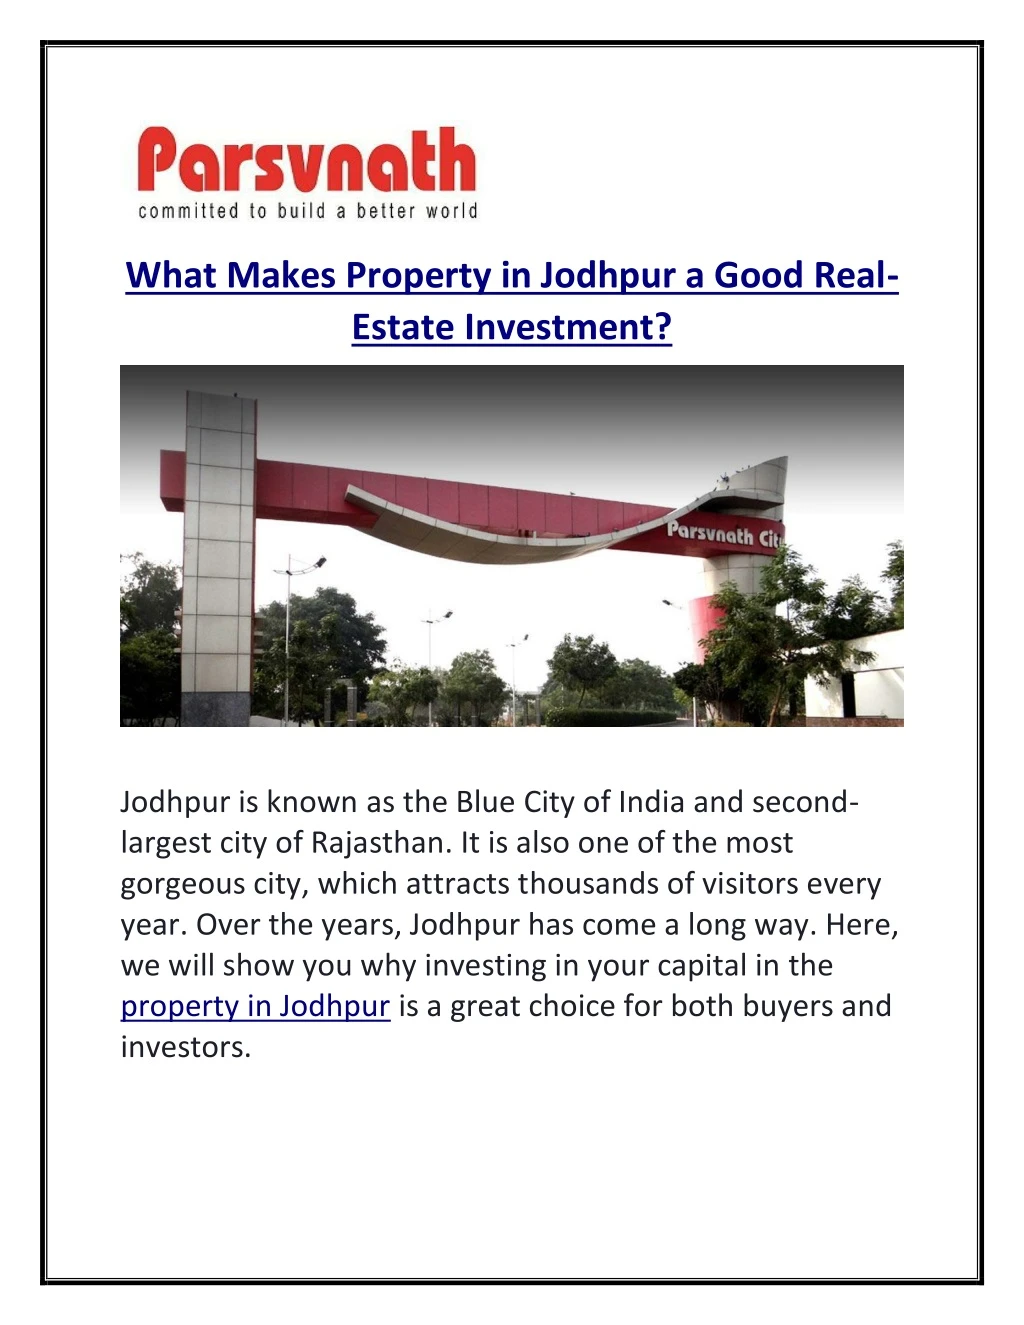 what makes property in jodhpur a good real estate